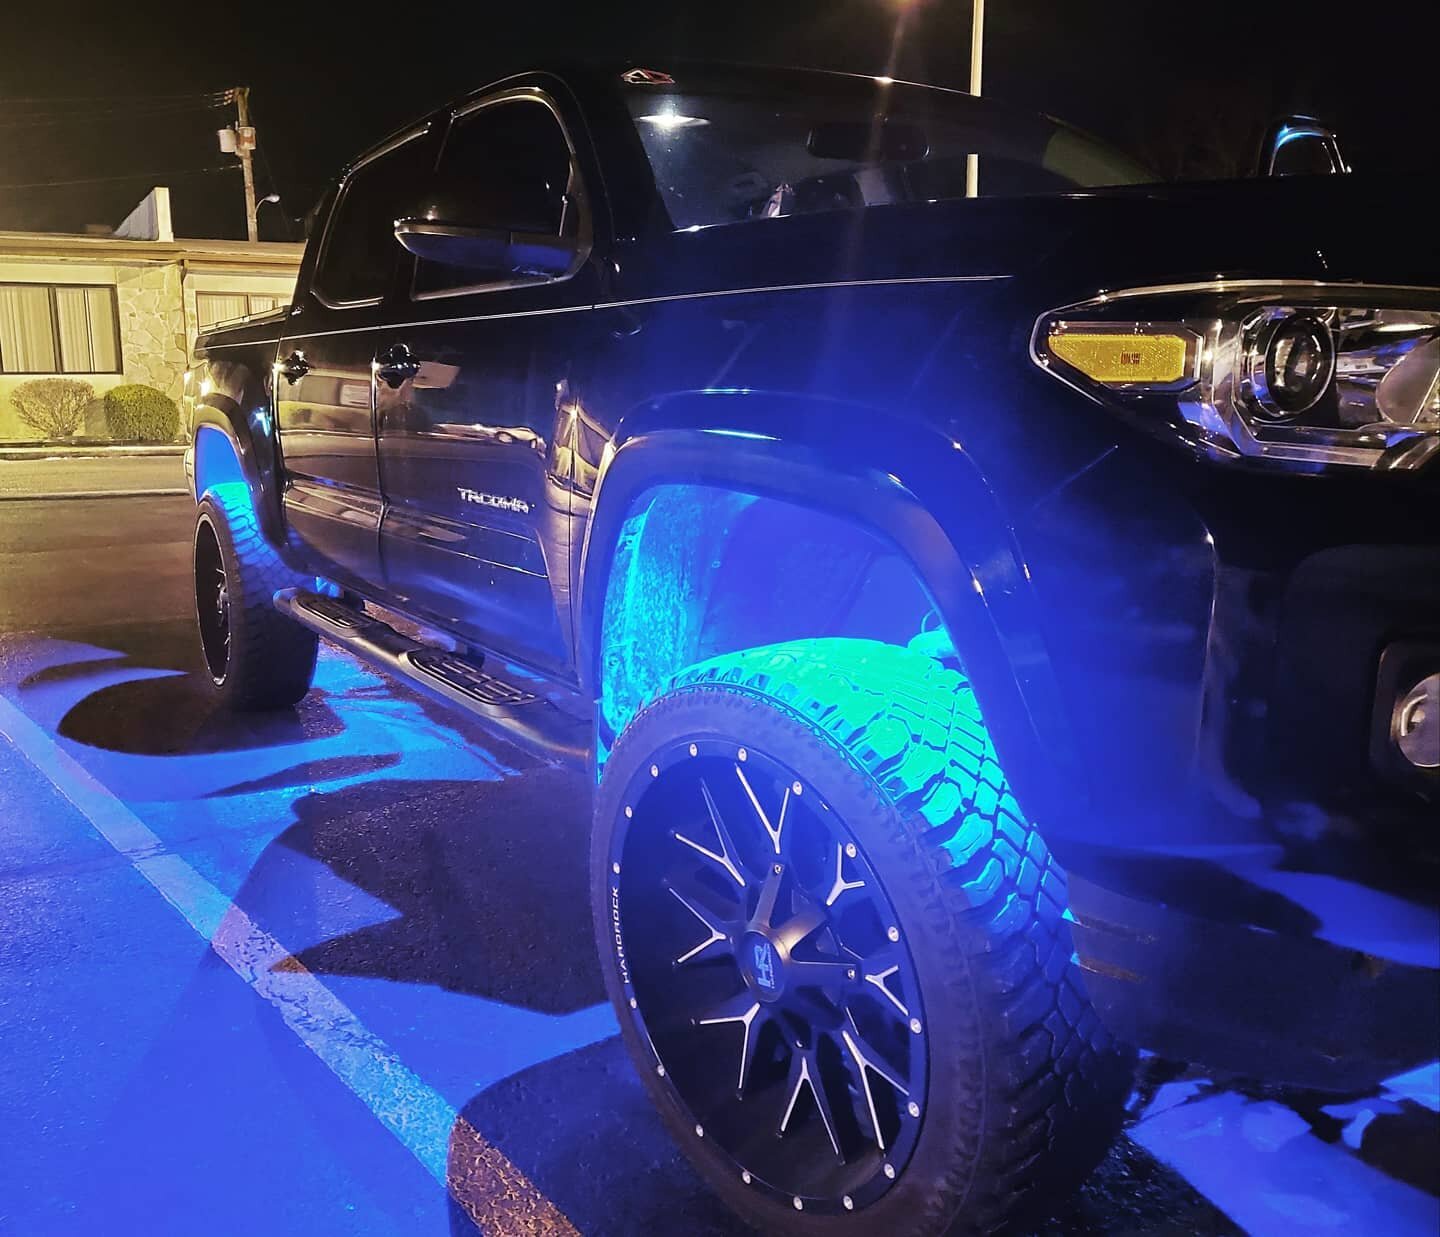 RockLights on a 16' Tacoma

#mecp #mobileelectronics #installer #12volt #happycustomer #southjersey #business #trucknation #truckdaily #instatruck #HeiseLED #ledlights #led